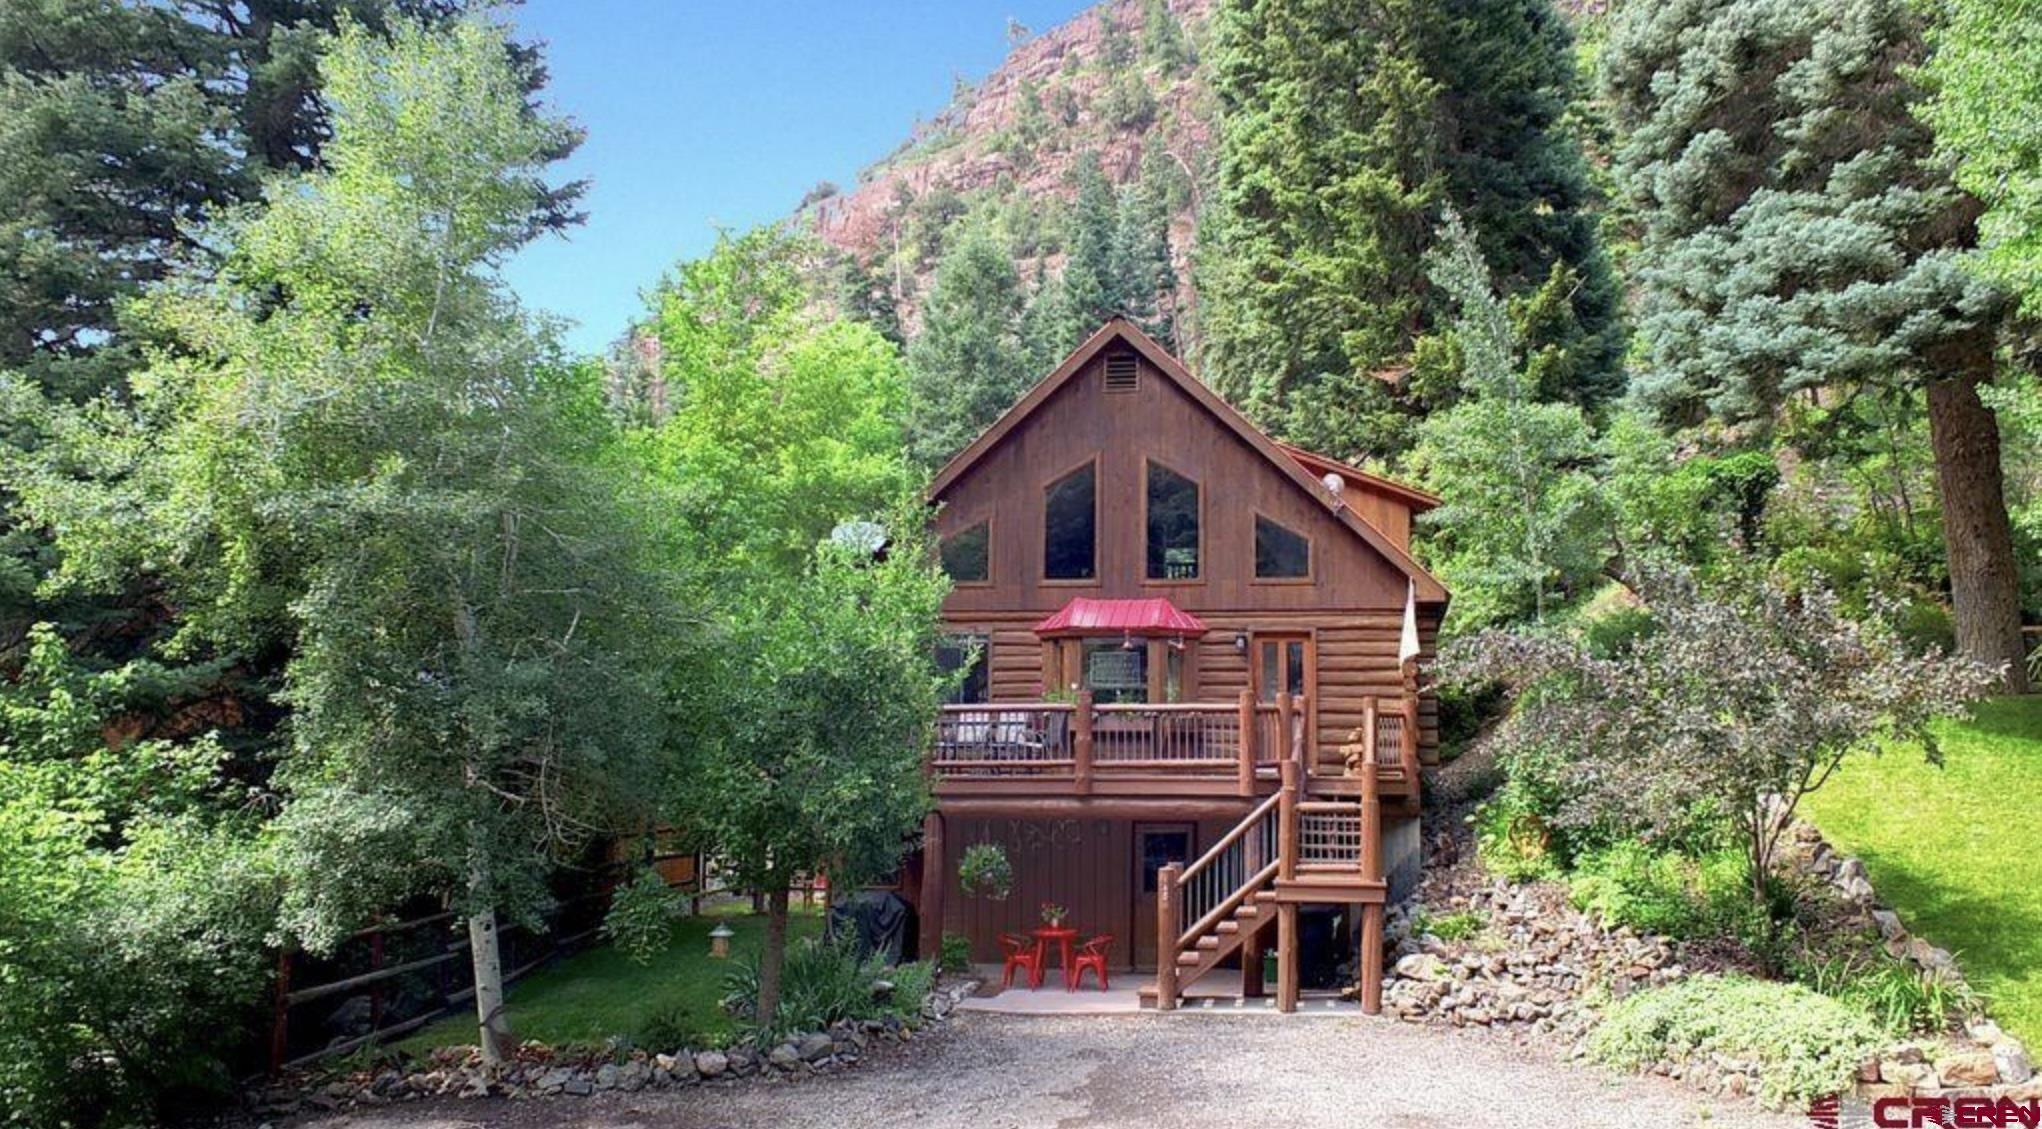 Welcome to your own piece of paradise located in the City of Ouray. This a stunning log cabin boasting 3 bedrooms and 2 1/2 bathrooms with breathtaking mountain views. Step inside this meticulously renovated retreat to discover a haven of comfort and style. The interior is presented with all-new appliances and exquisite quartz countertops new sink and garbage disposal, all new toilets, complemented by fresh paint that revitalizes both the interior and exterior. Revel in the warmth of newly carpeted floors and refinished wood floors that add a touch of rustic elegance to every room. Each bedroom is adorned with new mattresses and linens, ensuring a restful night’s sleep after a day of adventure in the mountains. This charming cabin features not just one, but two fully equipped kitchens, along with two convenient laundry rooms. With a lock-off option to separate the loft from the downstairs area, you have the flexibility to utilize the space for short-term or long-term rentals, maximizing its potential as an investment property or private sanctuary. Step outside onto the expansive decks and patios to bask in the beauty of the surrounding landscape. Just .10 mile to walking trail along the Uncompahgre River. Enjoy al fresco dining and entertaining with two brand new Weber grills, while taking in the sights and sounds of nature. The beautifully landscaped grounds feature apple trees, majestic pine trees, and quaking aspens, creating a tranquil oasis where you can escape the hustle and bustle of everyday life. Whether you’re seeking a peaceful retreat to call your own or an income-generating property in a prime location, this log cabin offers the perfect blend of luxury, comfort, and natural beauty.